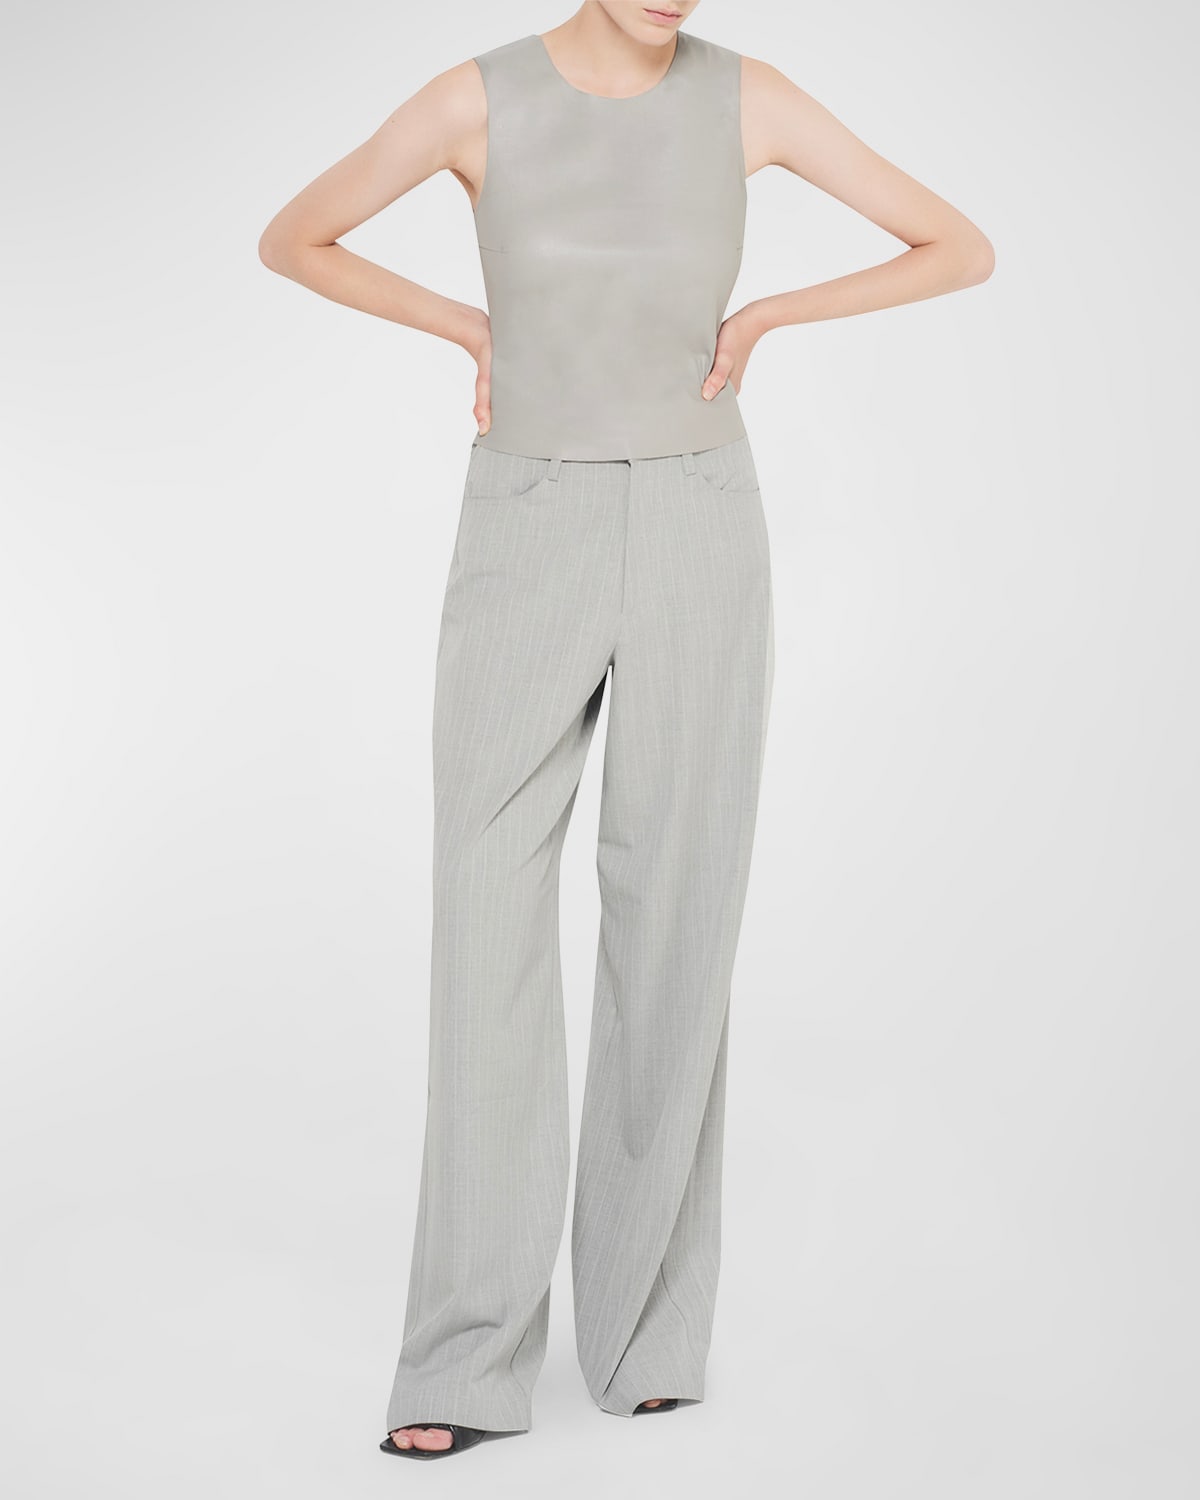 As By Df Luxembourg Pinstripe Baggy Trousers In Gray Pinstripe